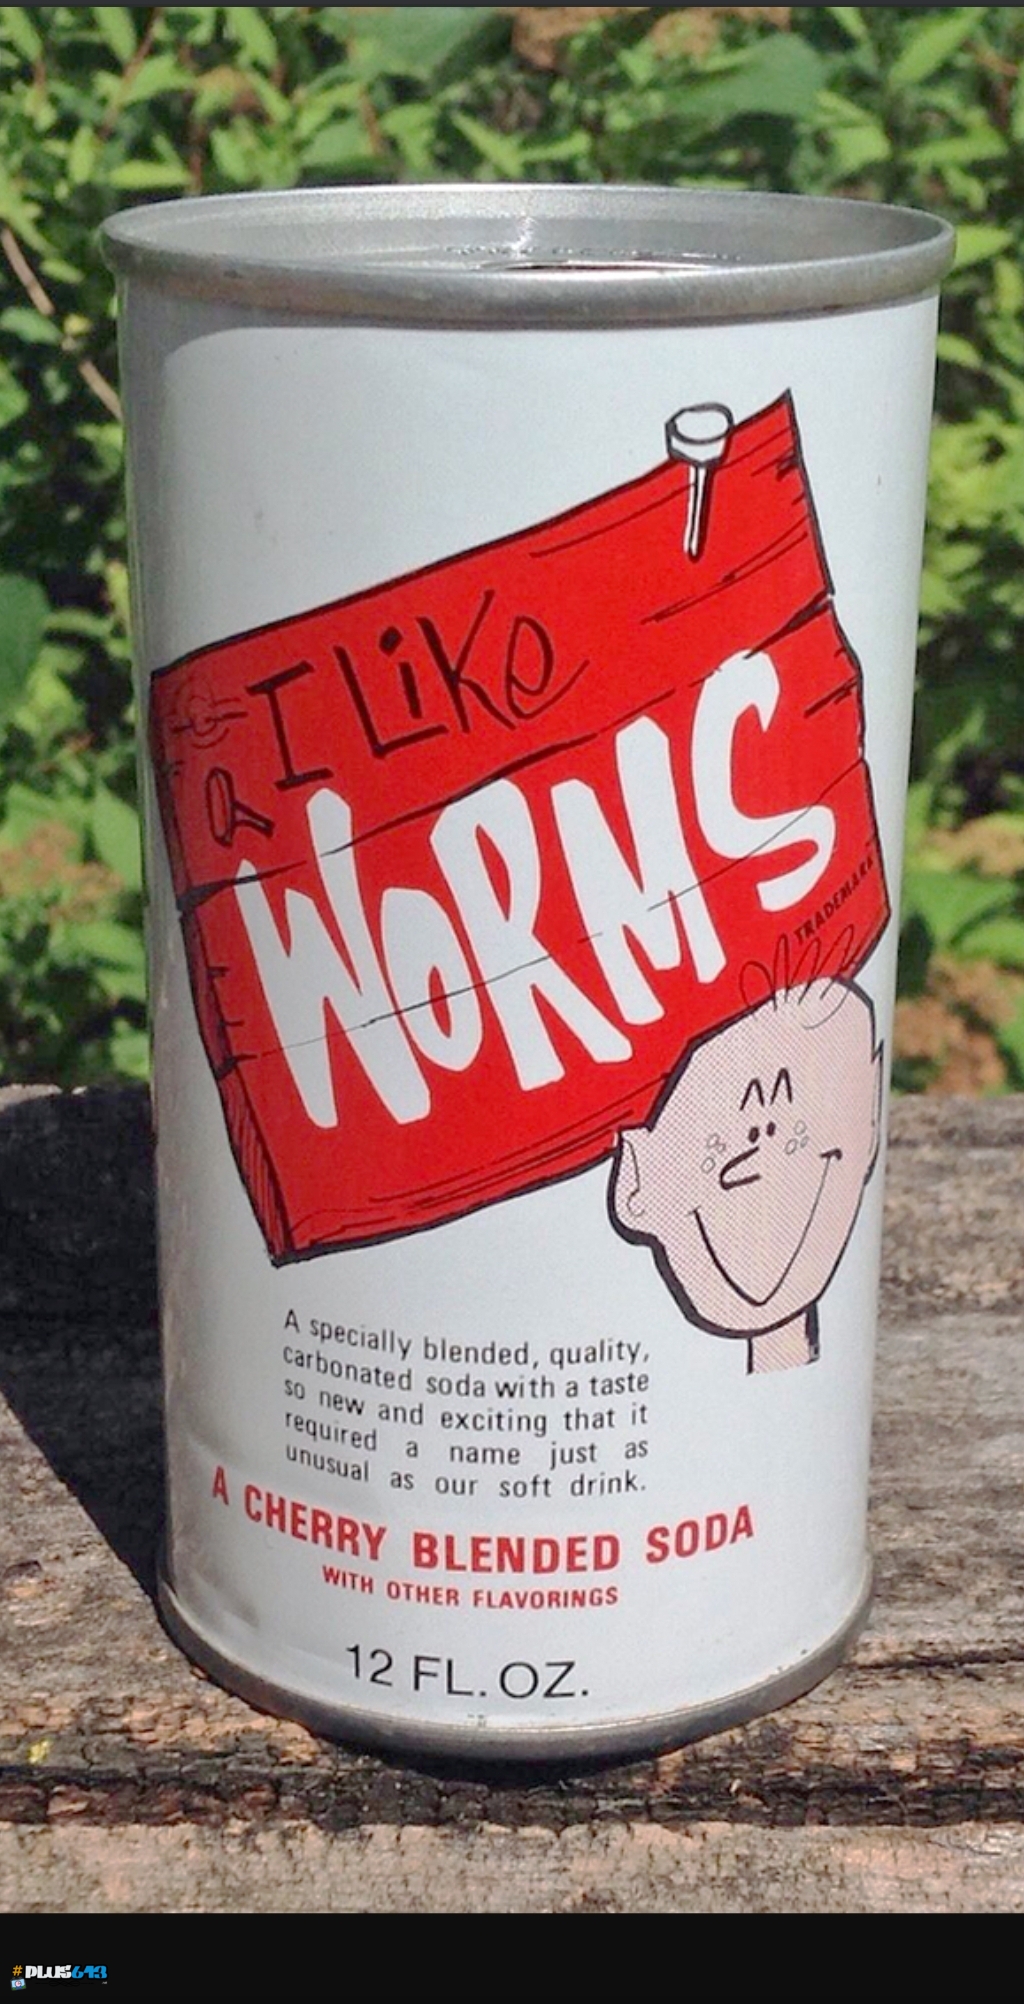 I drank worms when I was a kid